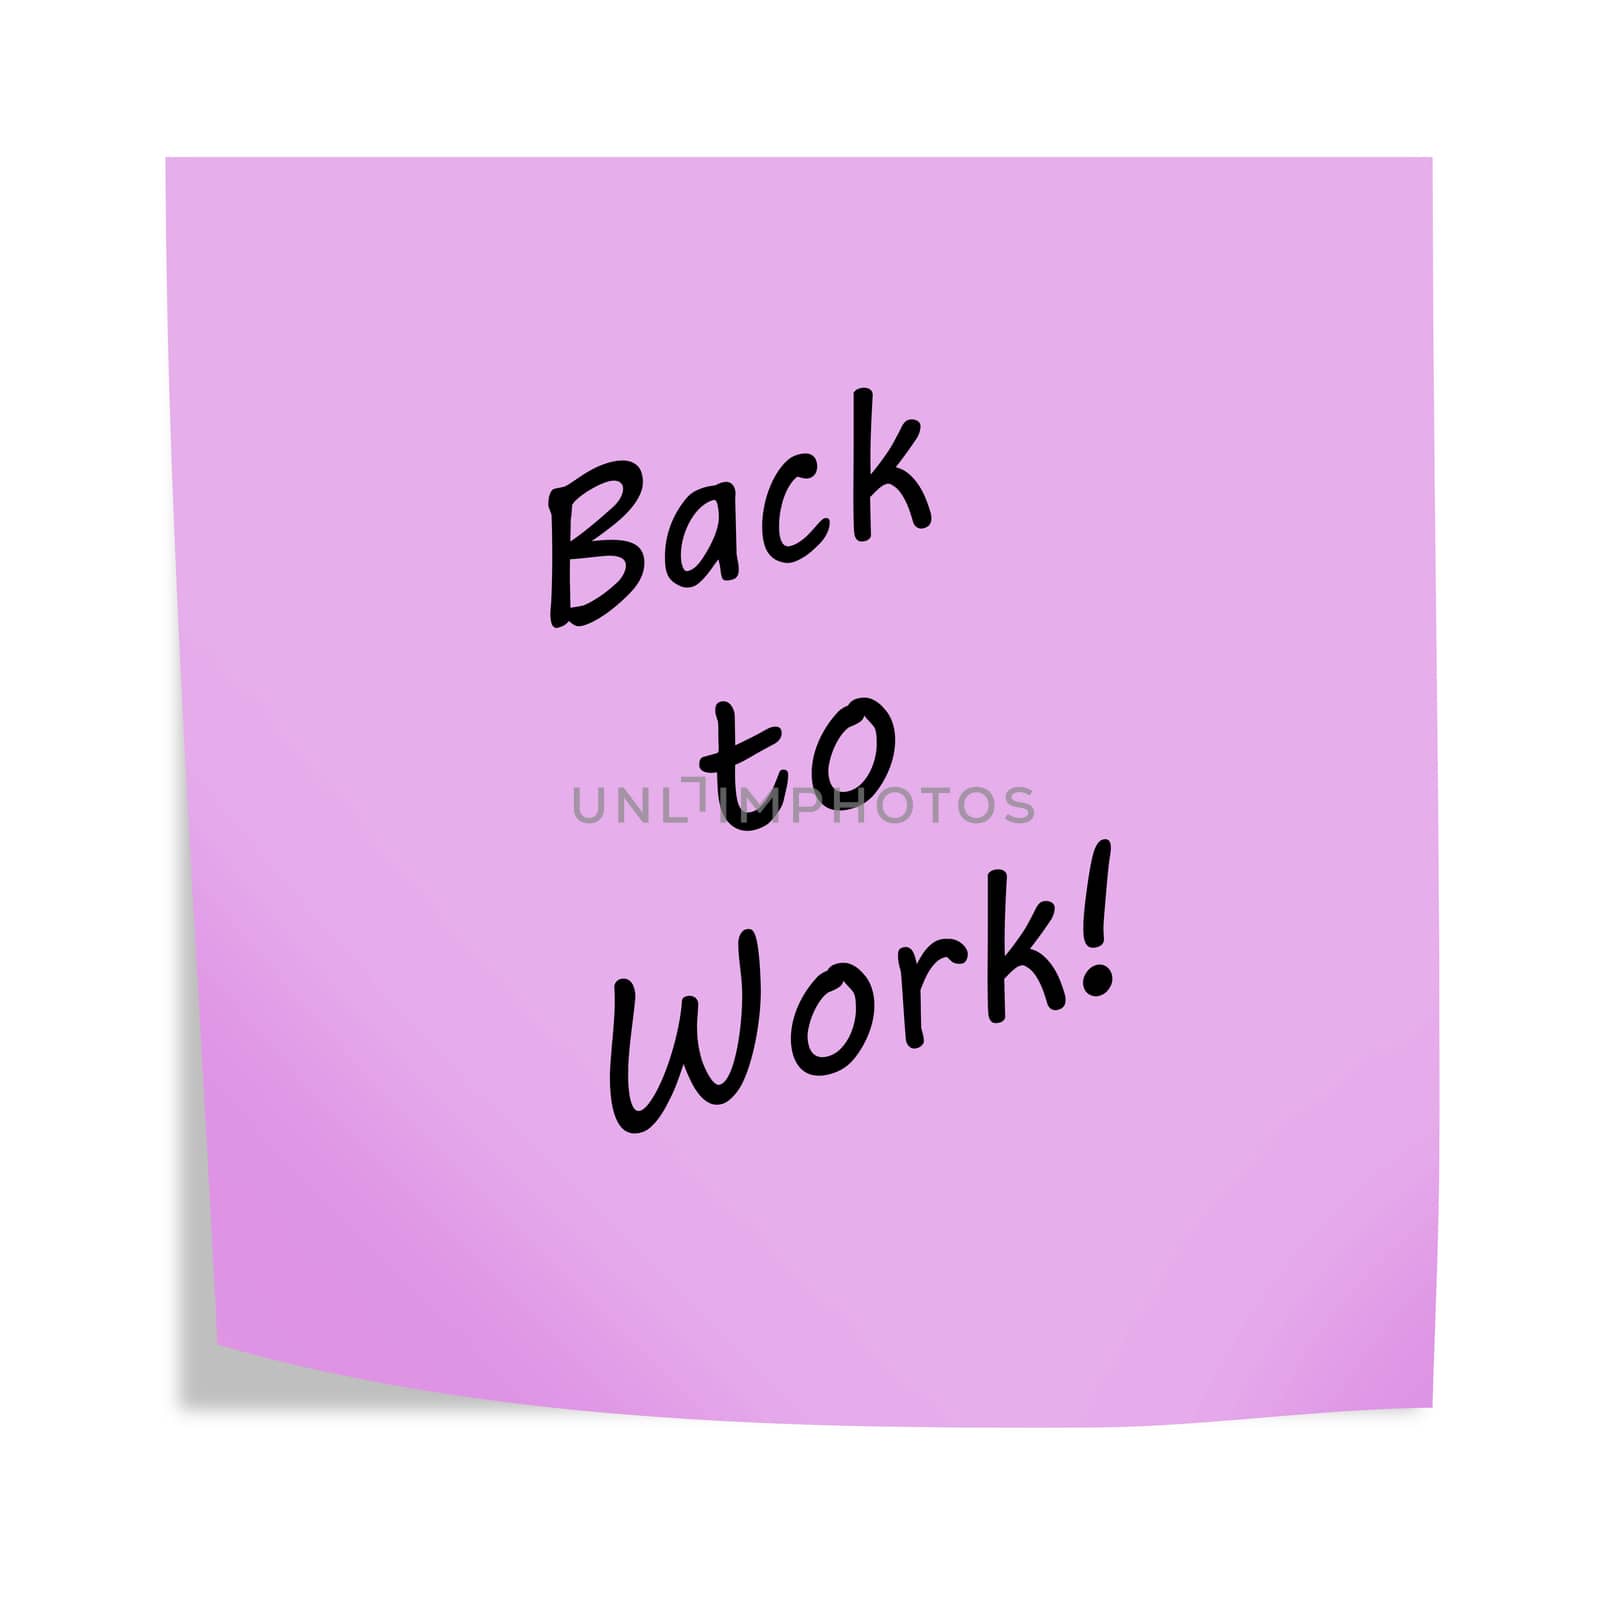 A back to work reminder post note isolated on white with clipping path